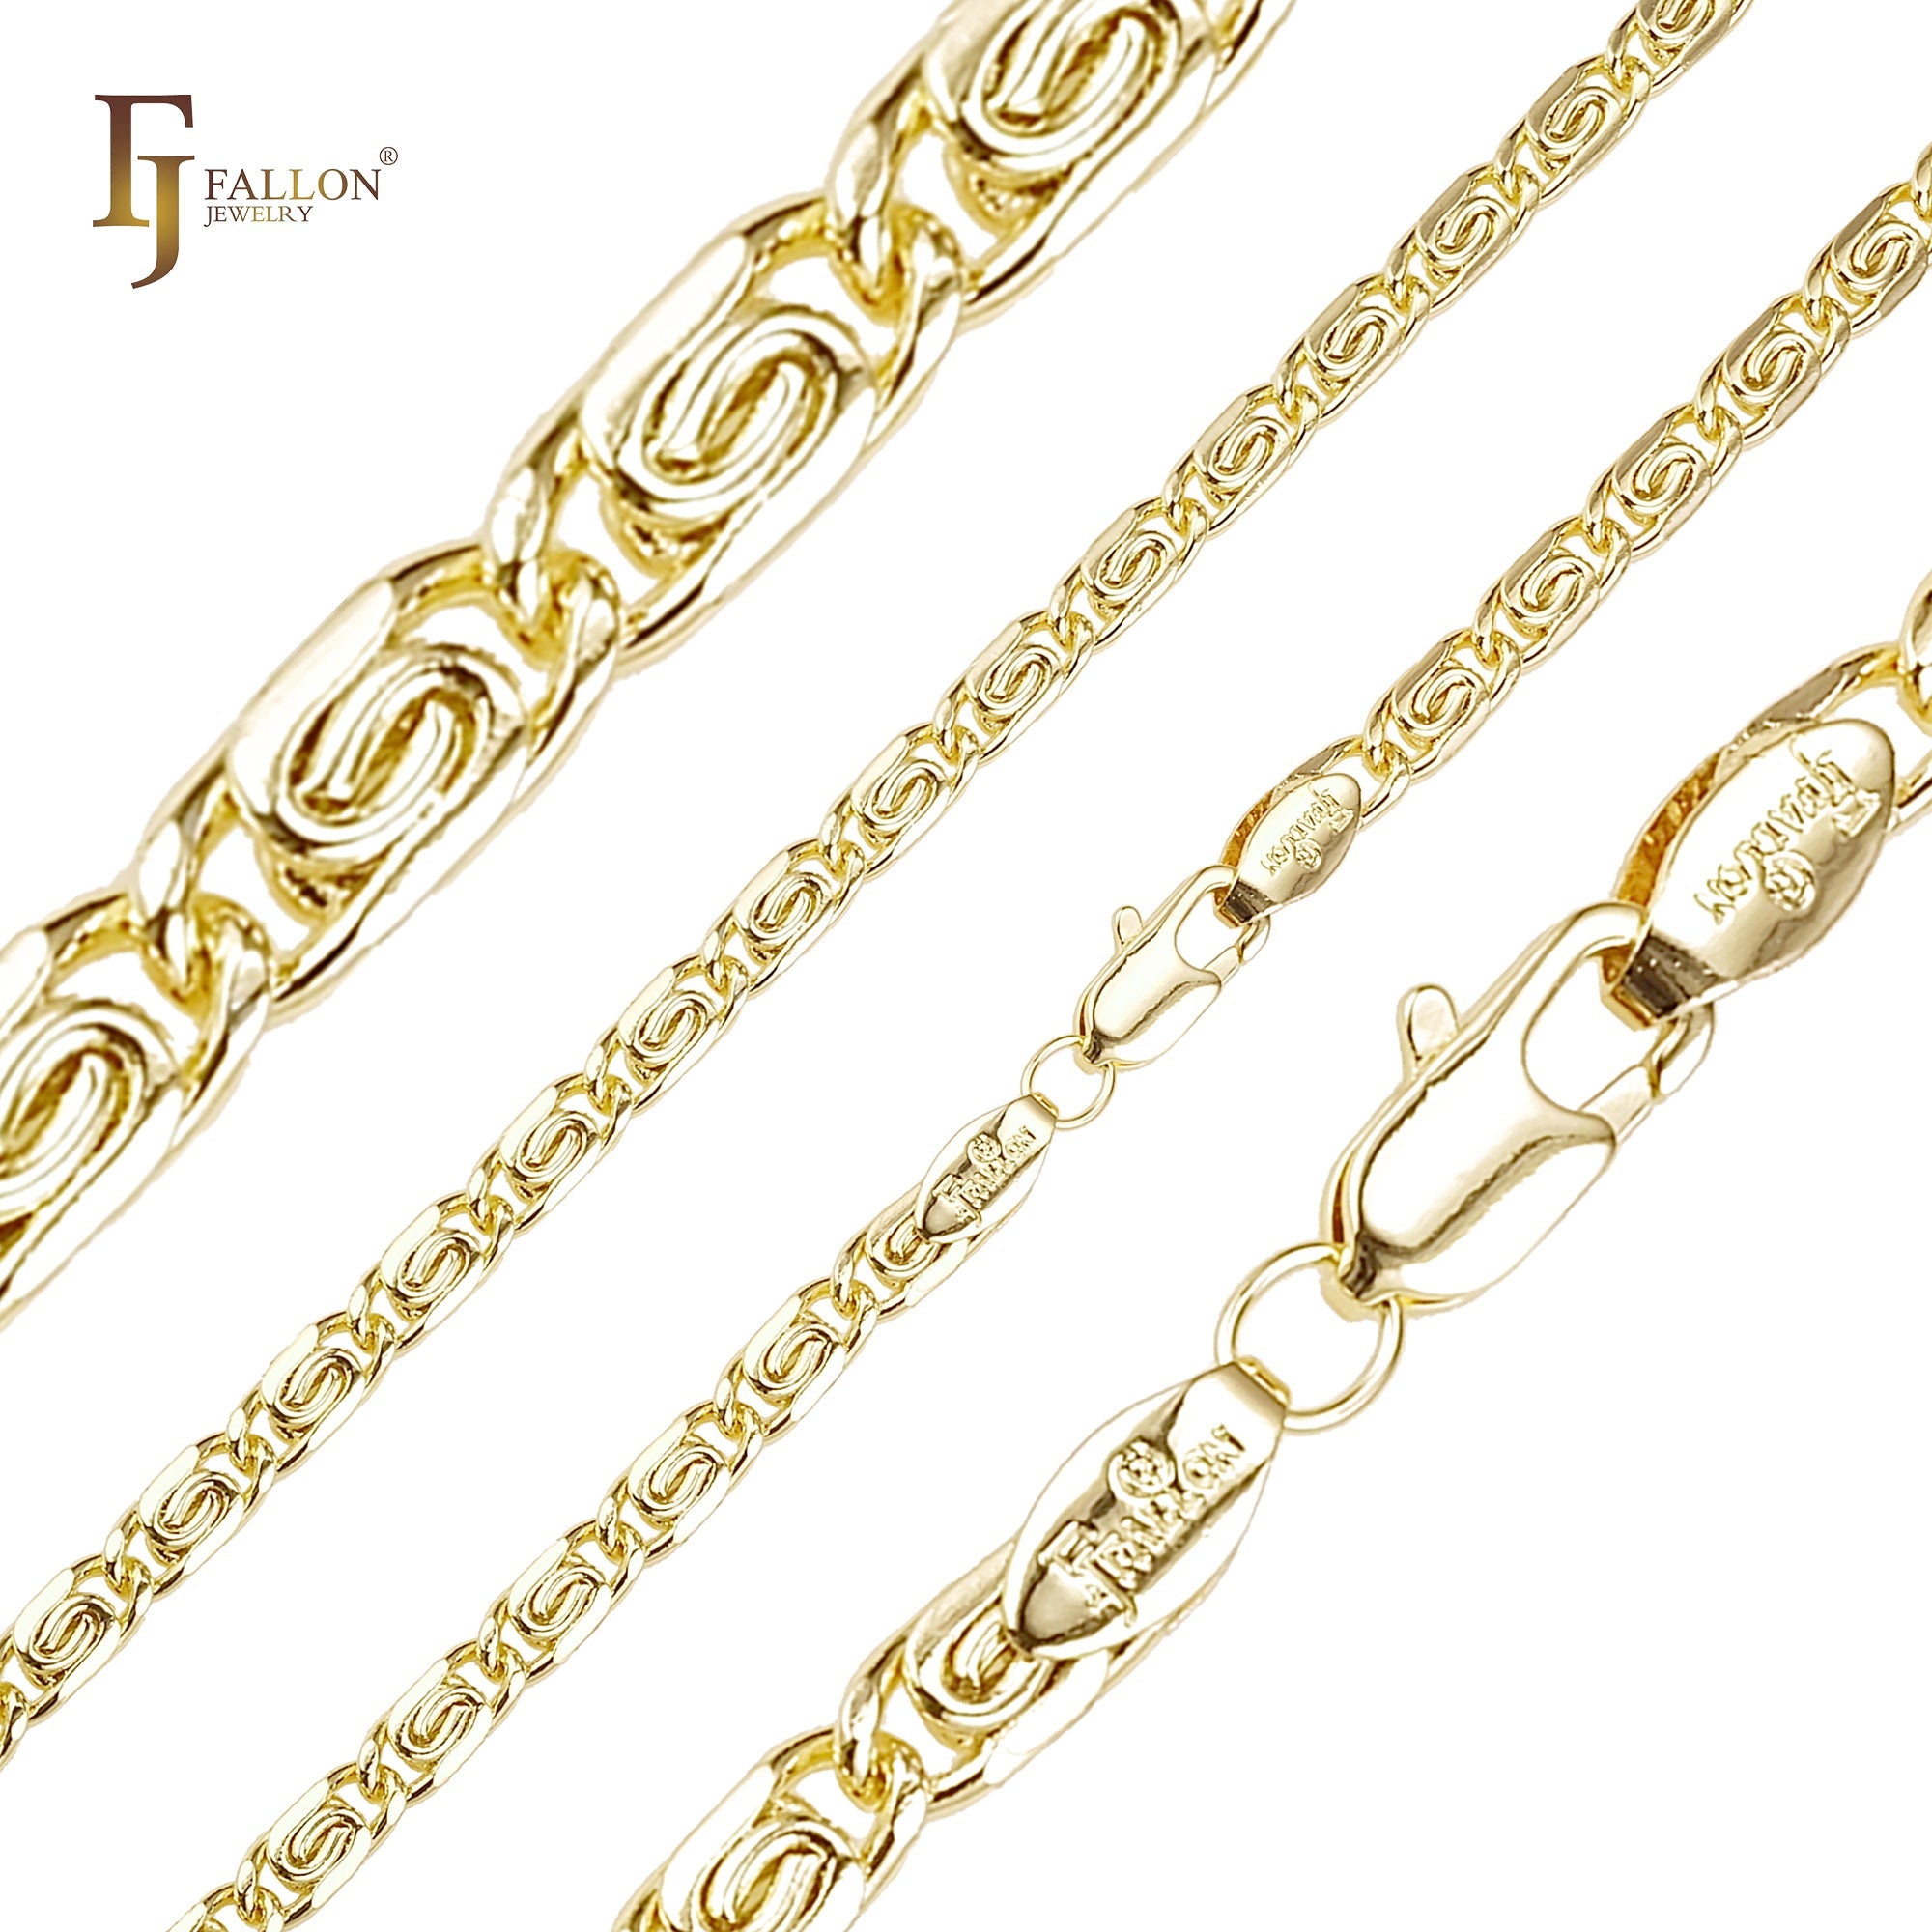 Classic rounded flank Snail link 14K Gold, White Gold chains